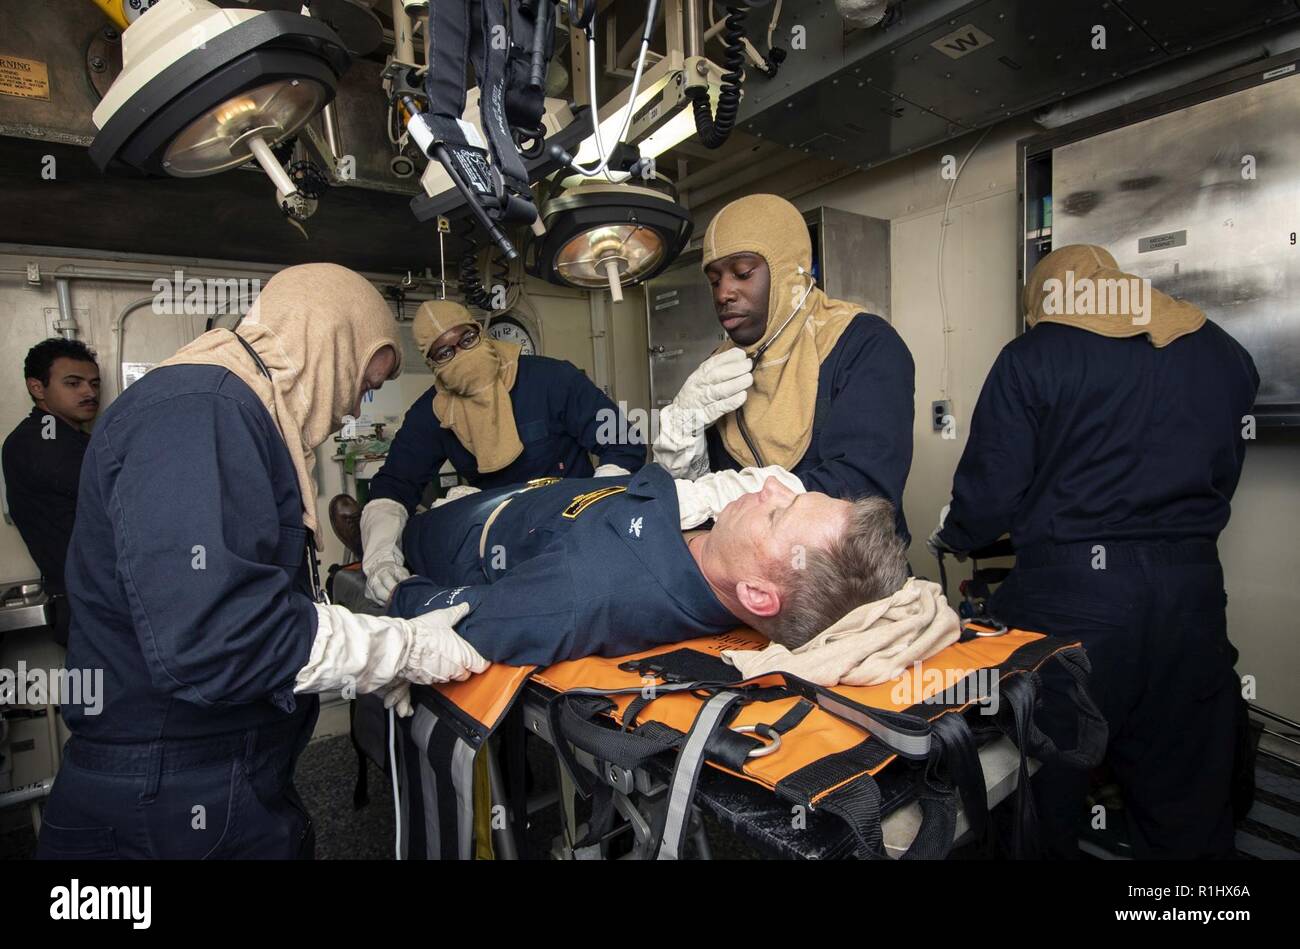 PACIFIC OCEAN (Sept. 21, 2018) Sailors, assigned to the amphibious assault ship USS Bonhomme Richard (LHD 6), simulate providing medical care to Capt. Gregory Thoroman, the ship’s executive officer, in the forward battle dress station during a general quarters drill. Bonhomme Richard is currently underway in the U.S. 3rd Fleet area of operations. Stock Photo